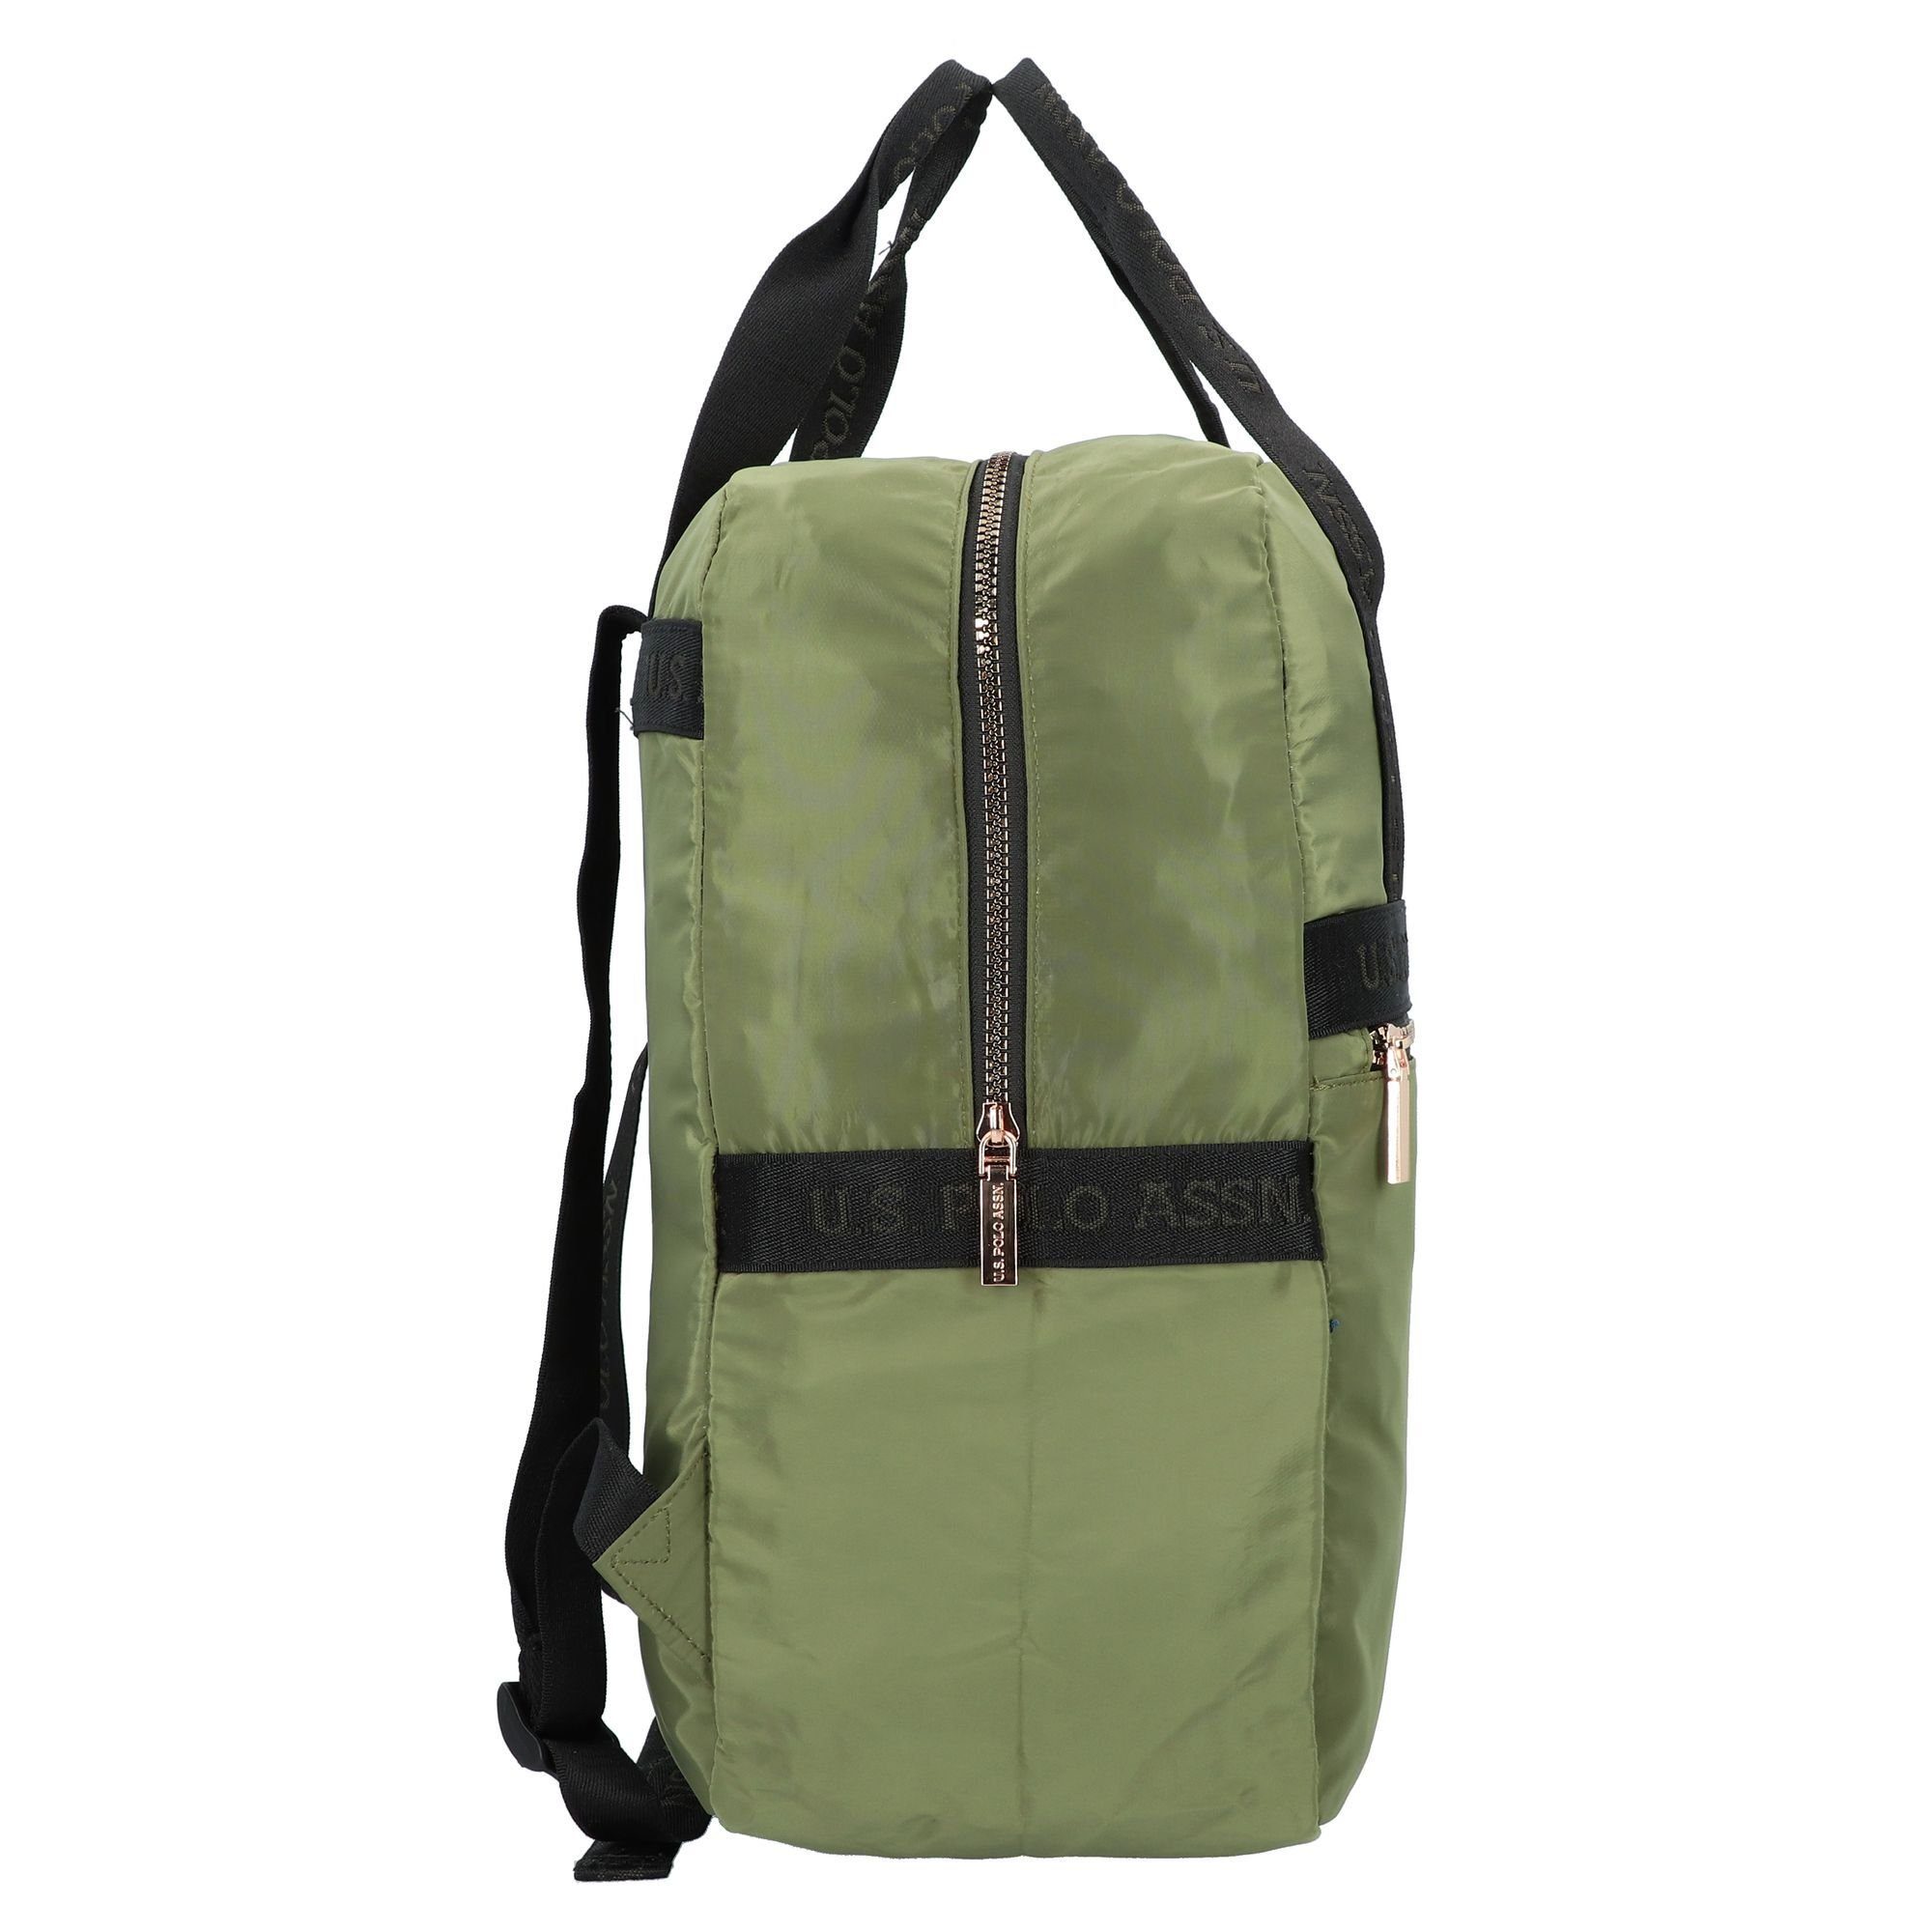 U.S. green Polo Chic, Assn Sport Daypack New Polyester